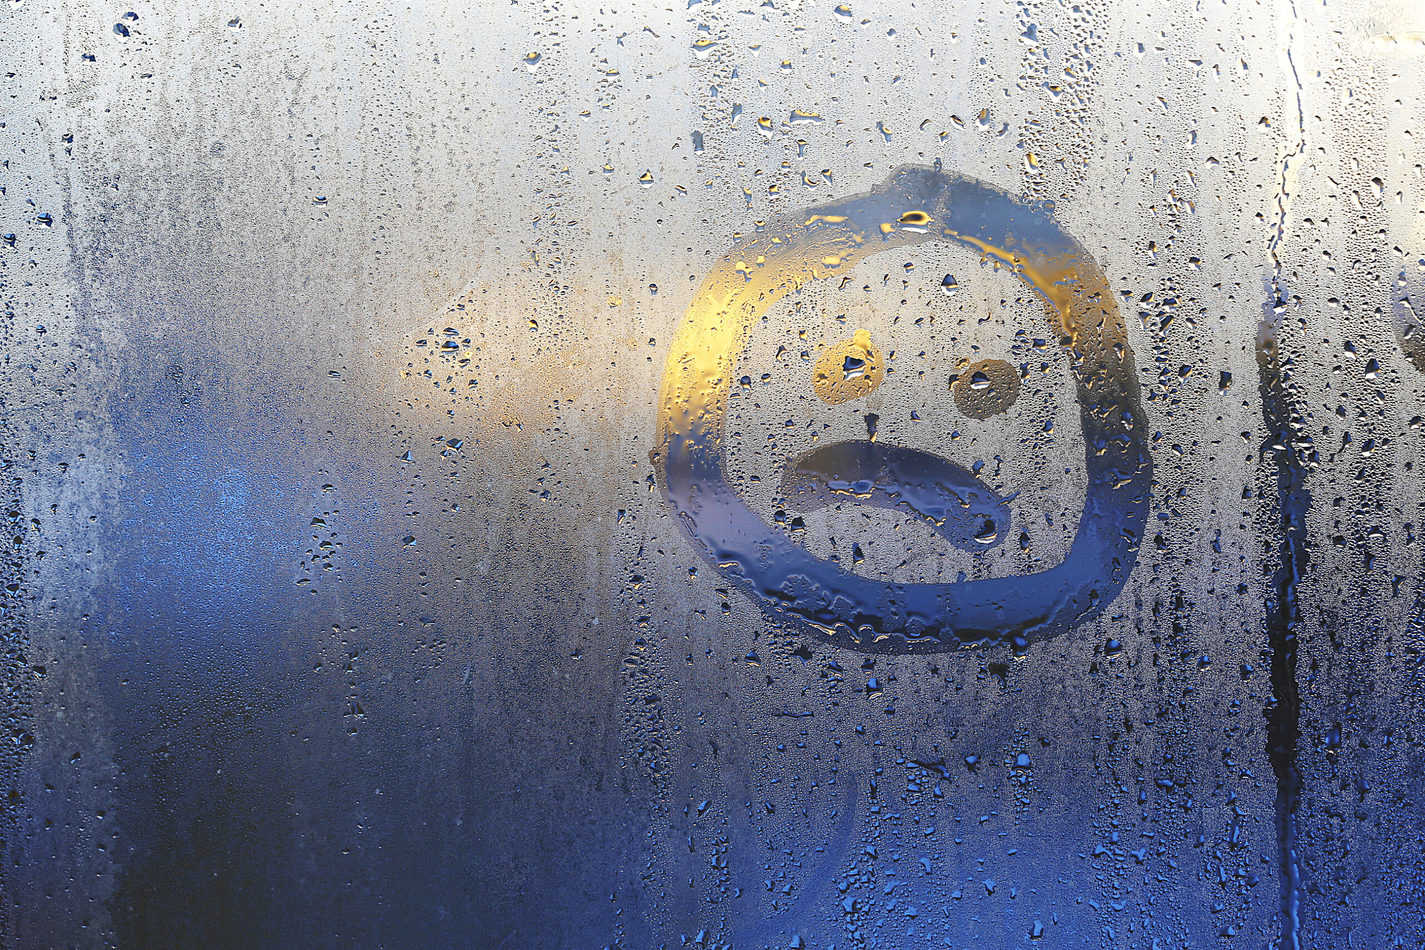 sad face drawn in condensation on a window